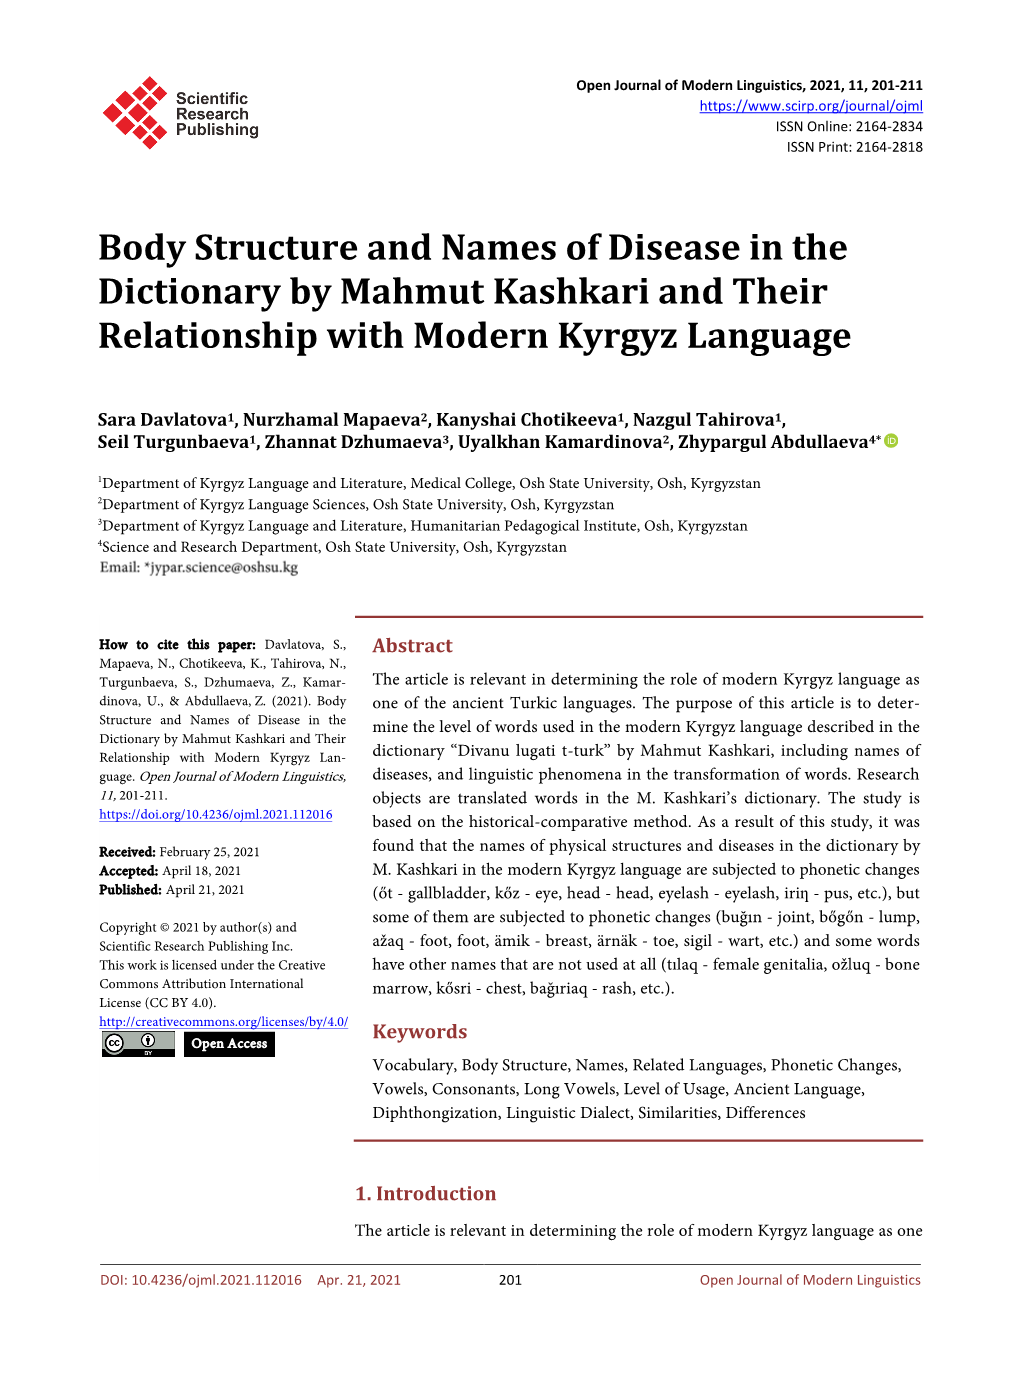 Body Structure and Names of Disease in the Dictionary by Mahmut Kashkari and Their Relationship with Modern Kyrgyz Language